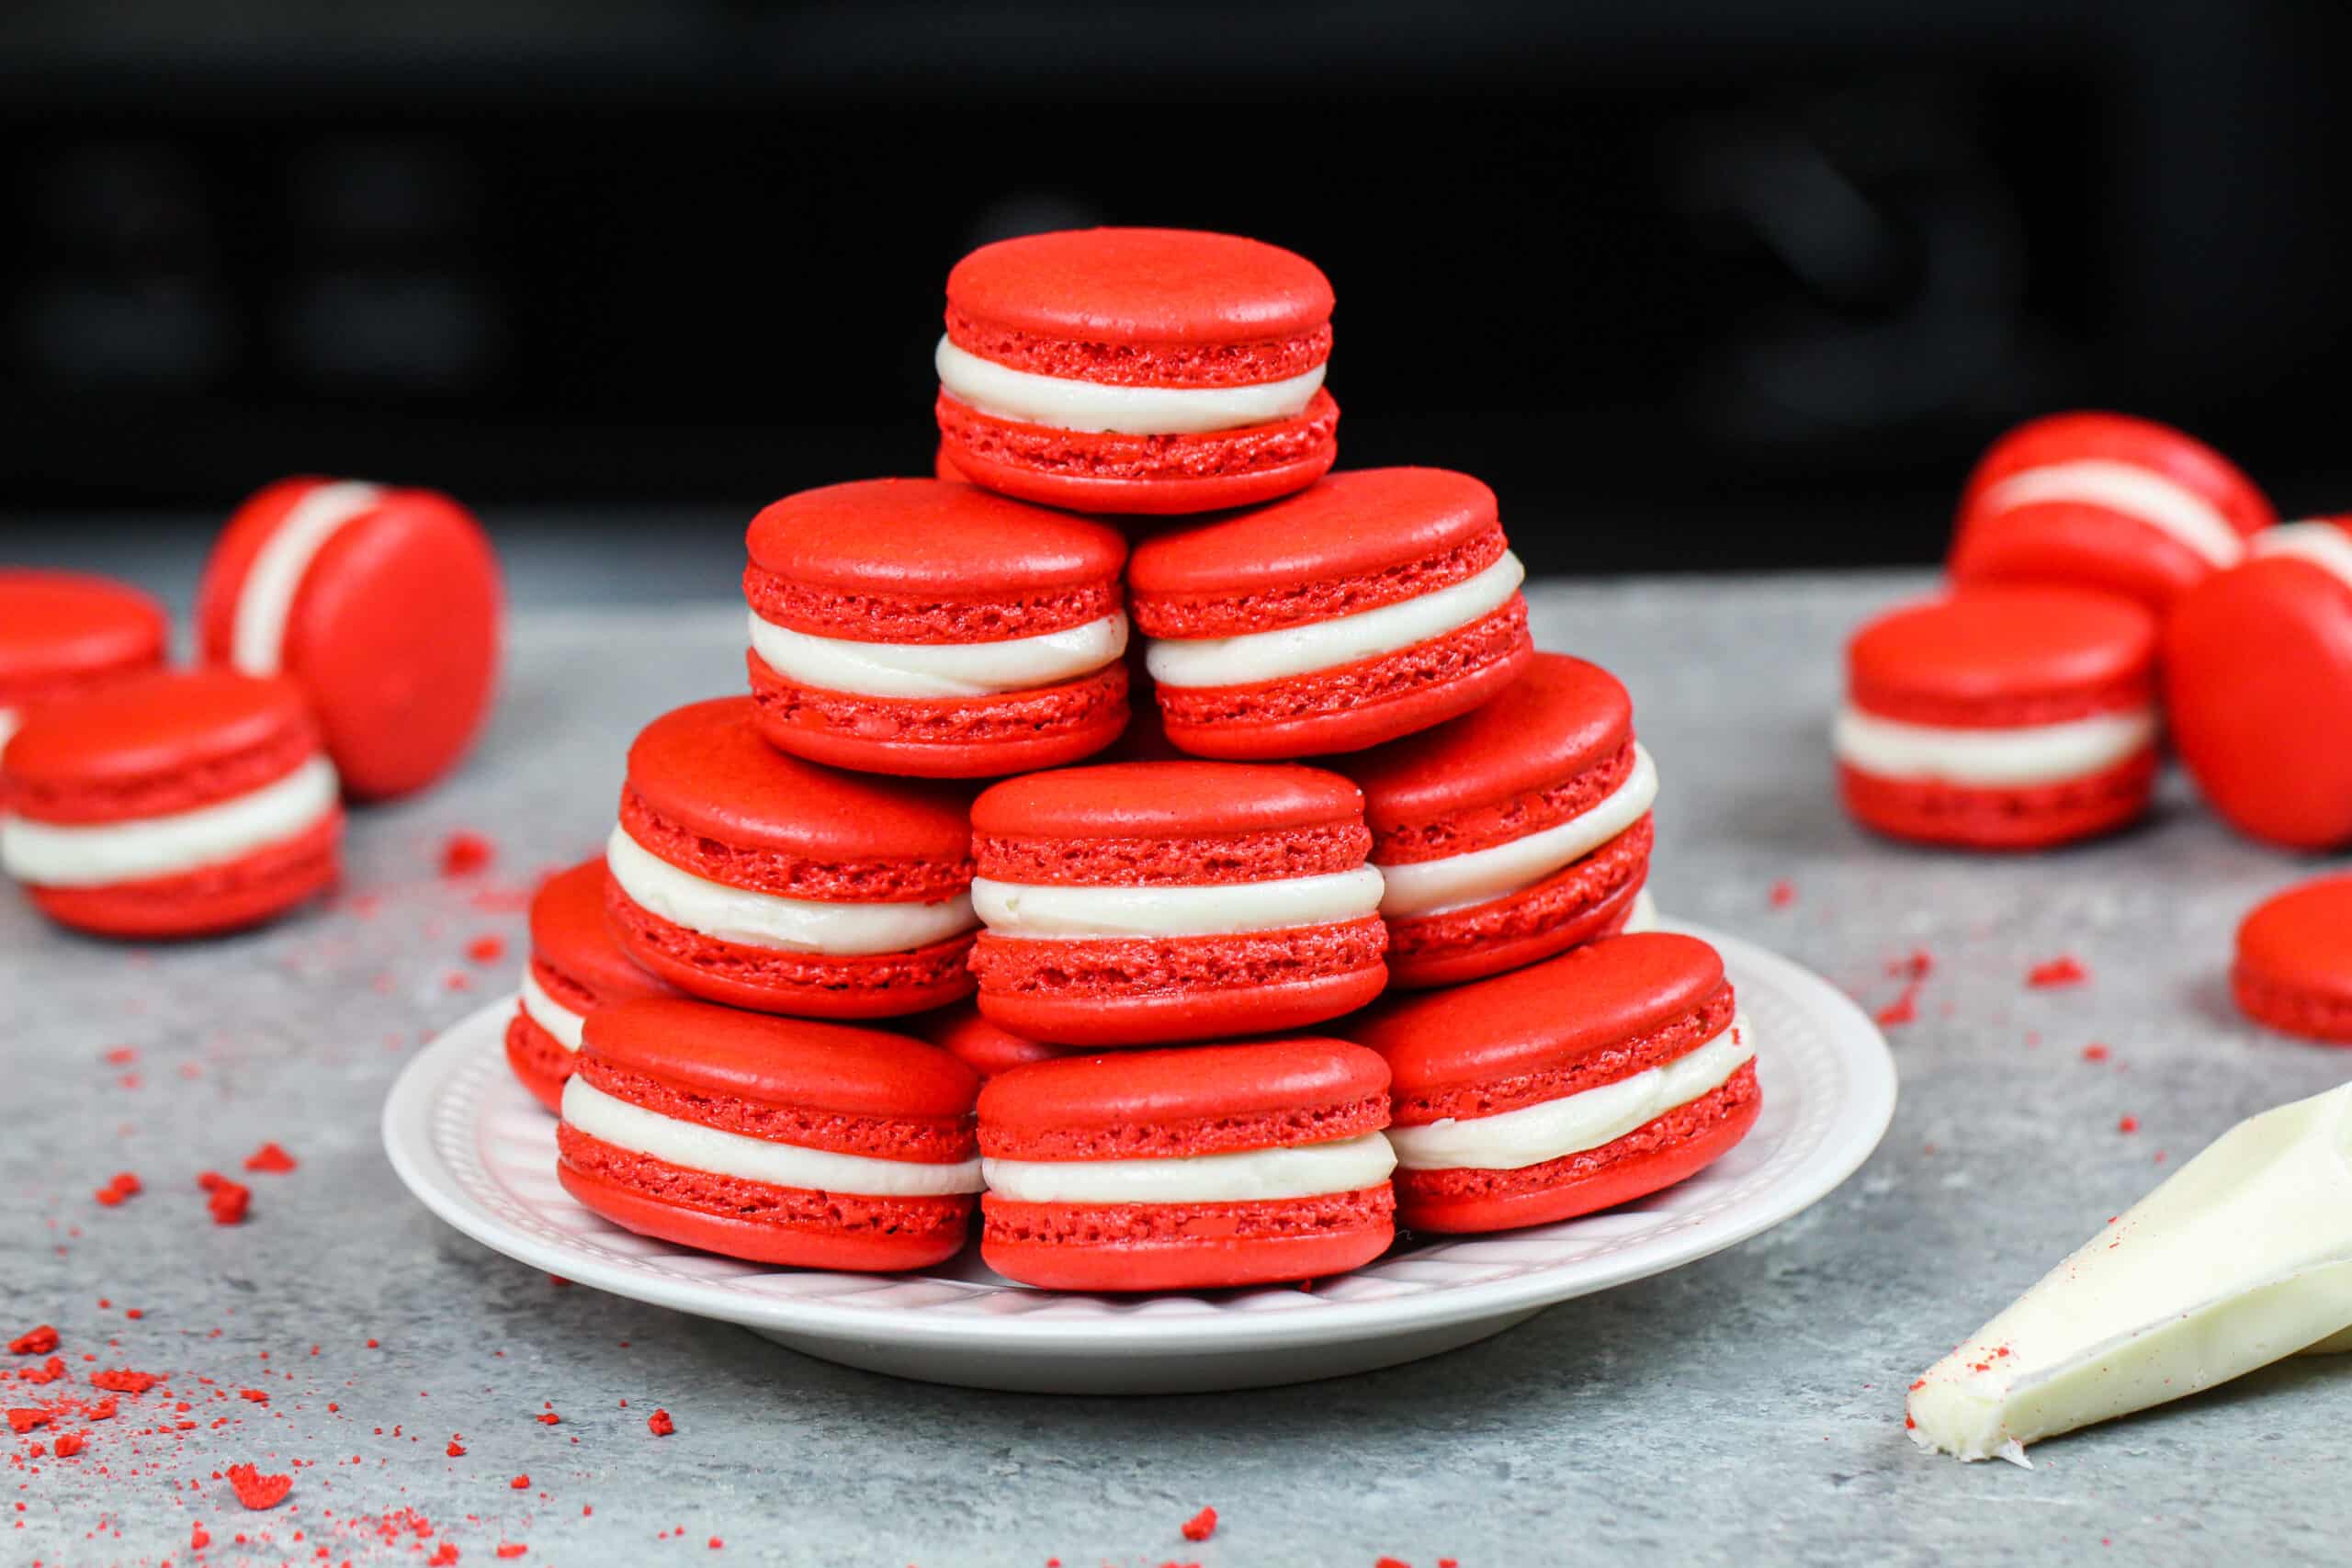 image of red velvet macarons stacked on a plate